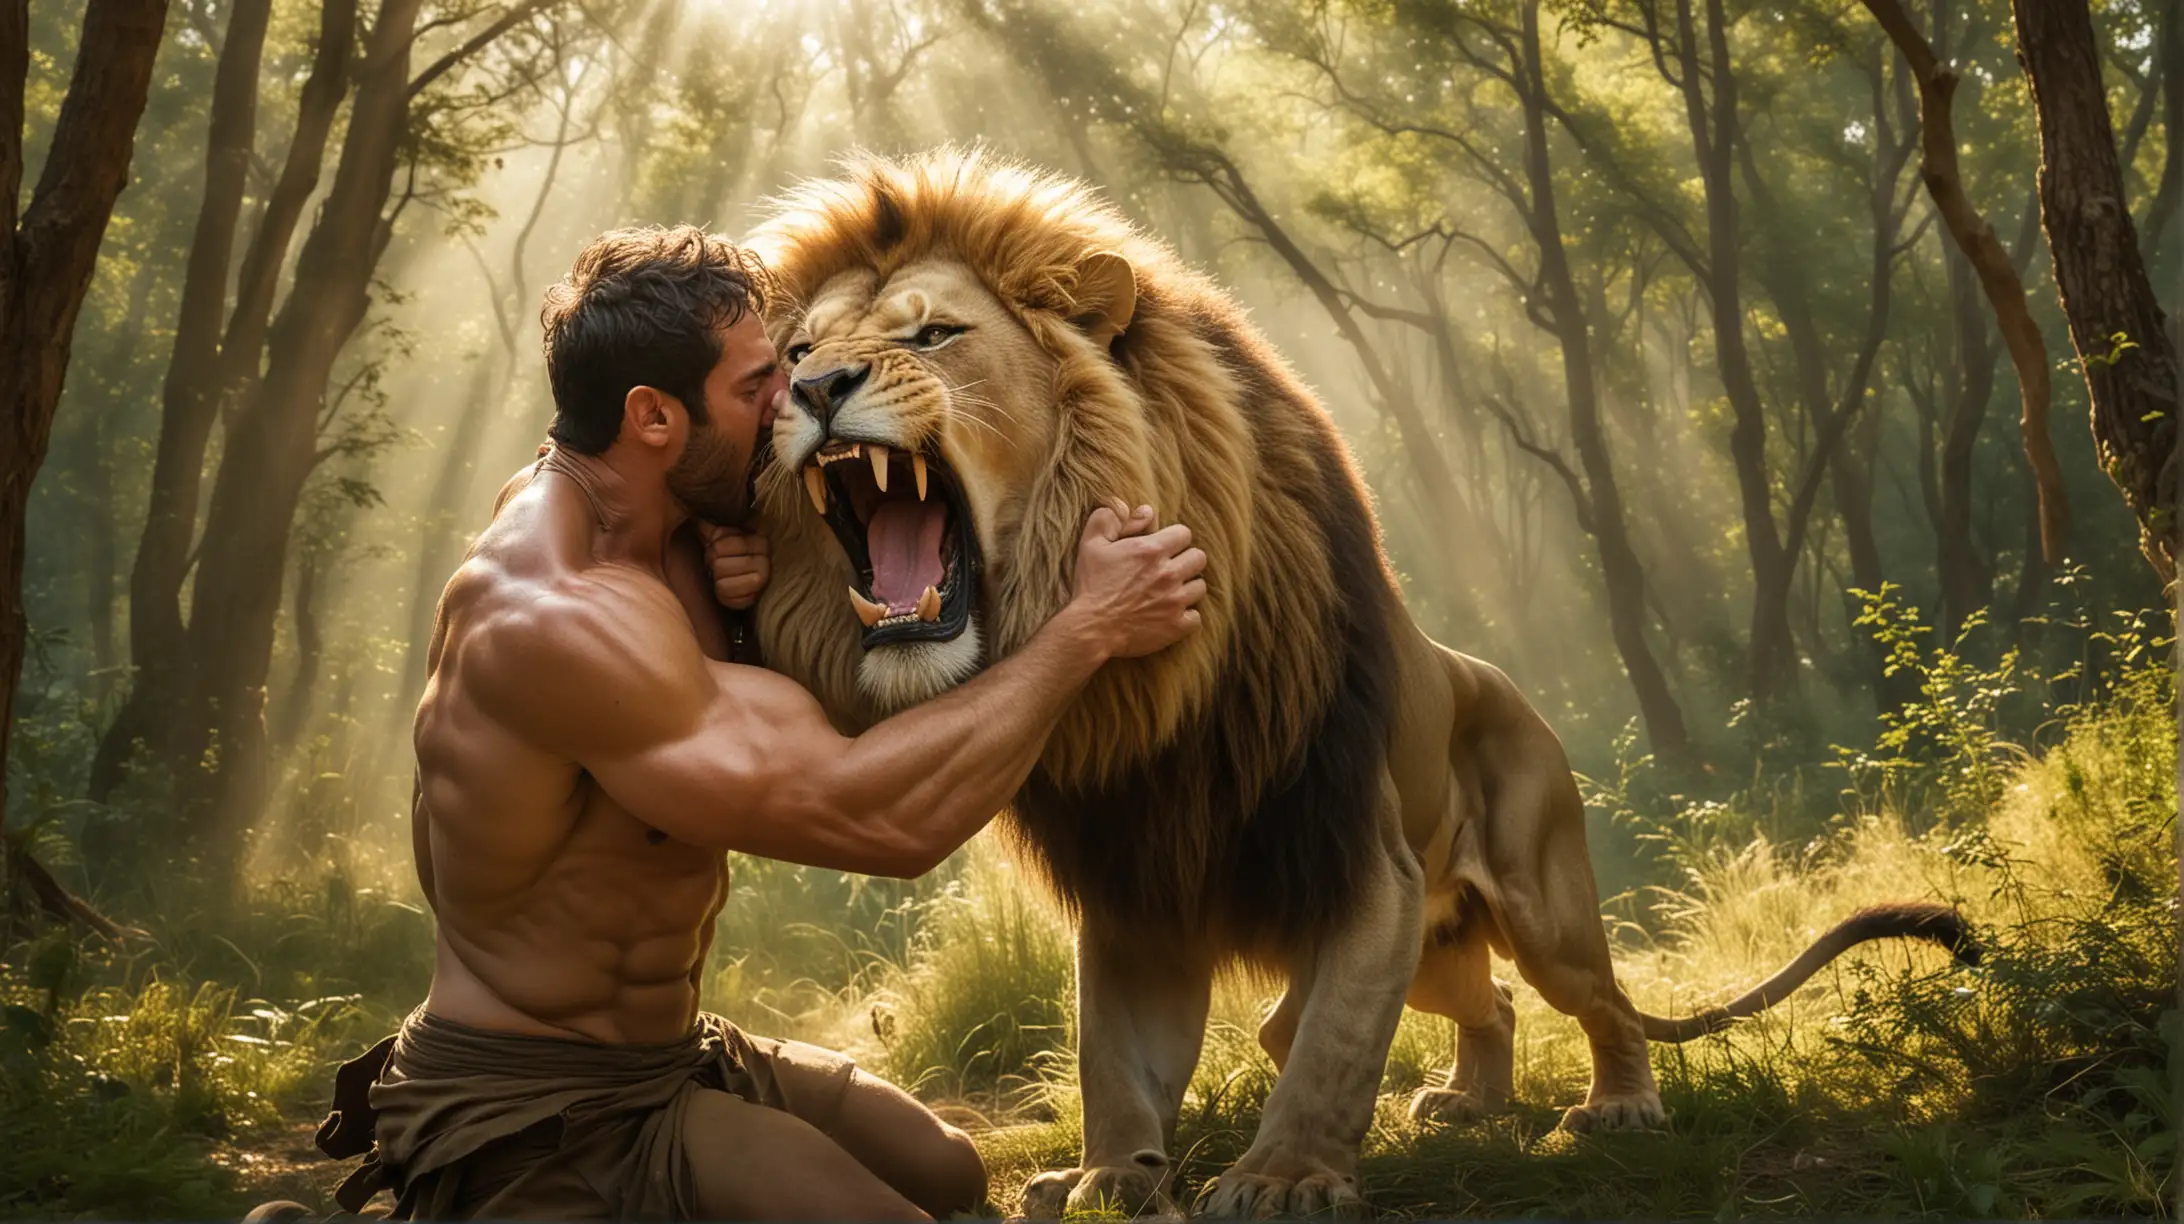 Man Strangling the Lion in a Forest Clearing: Show a muscular Greek hero, a man with bulging biceps and a determined expression, grappling with the lion. The lion, with its golden fur and fearsome fangs, struggles fiercely. The scene is set in a dense forest clearing with sunlight filtering through the trees.